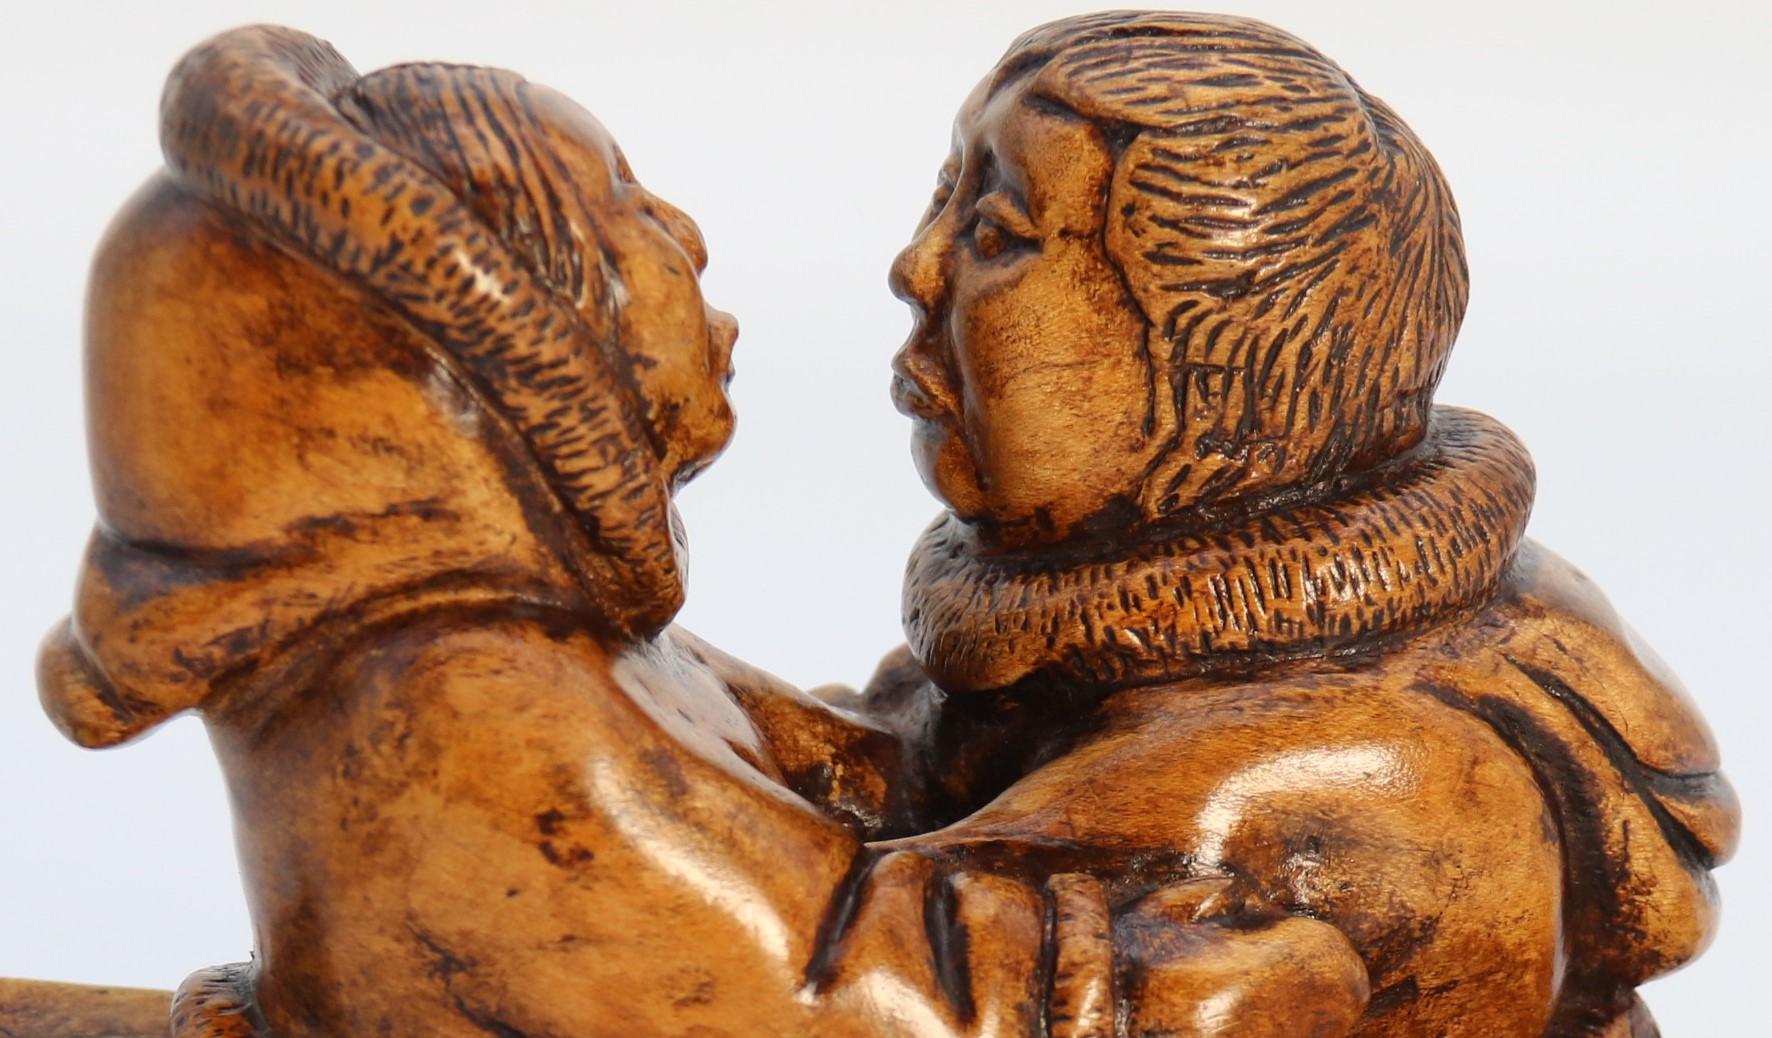 
This superb rare figure group is a piece of Canadian folk art. It is beautifully hand carved in Canadian yellow maple wood, a heavy, dense timber. It depicts two young indigenous people from the Arctic region of Canada in a romantic meeting whilst